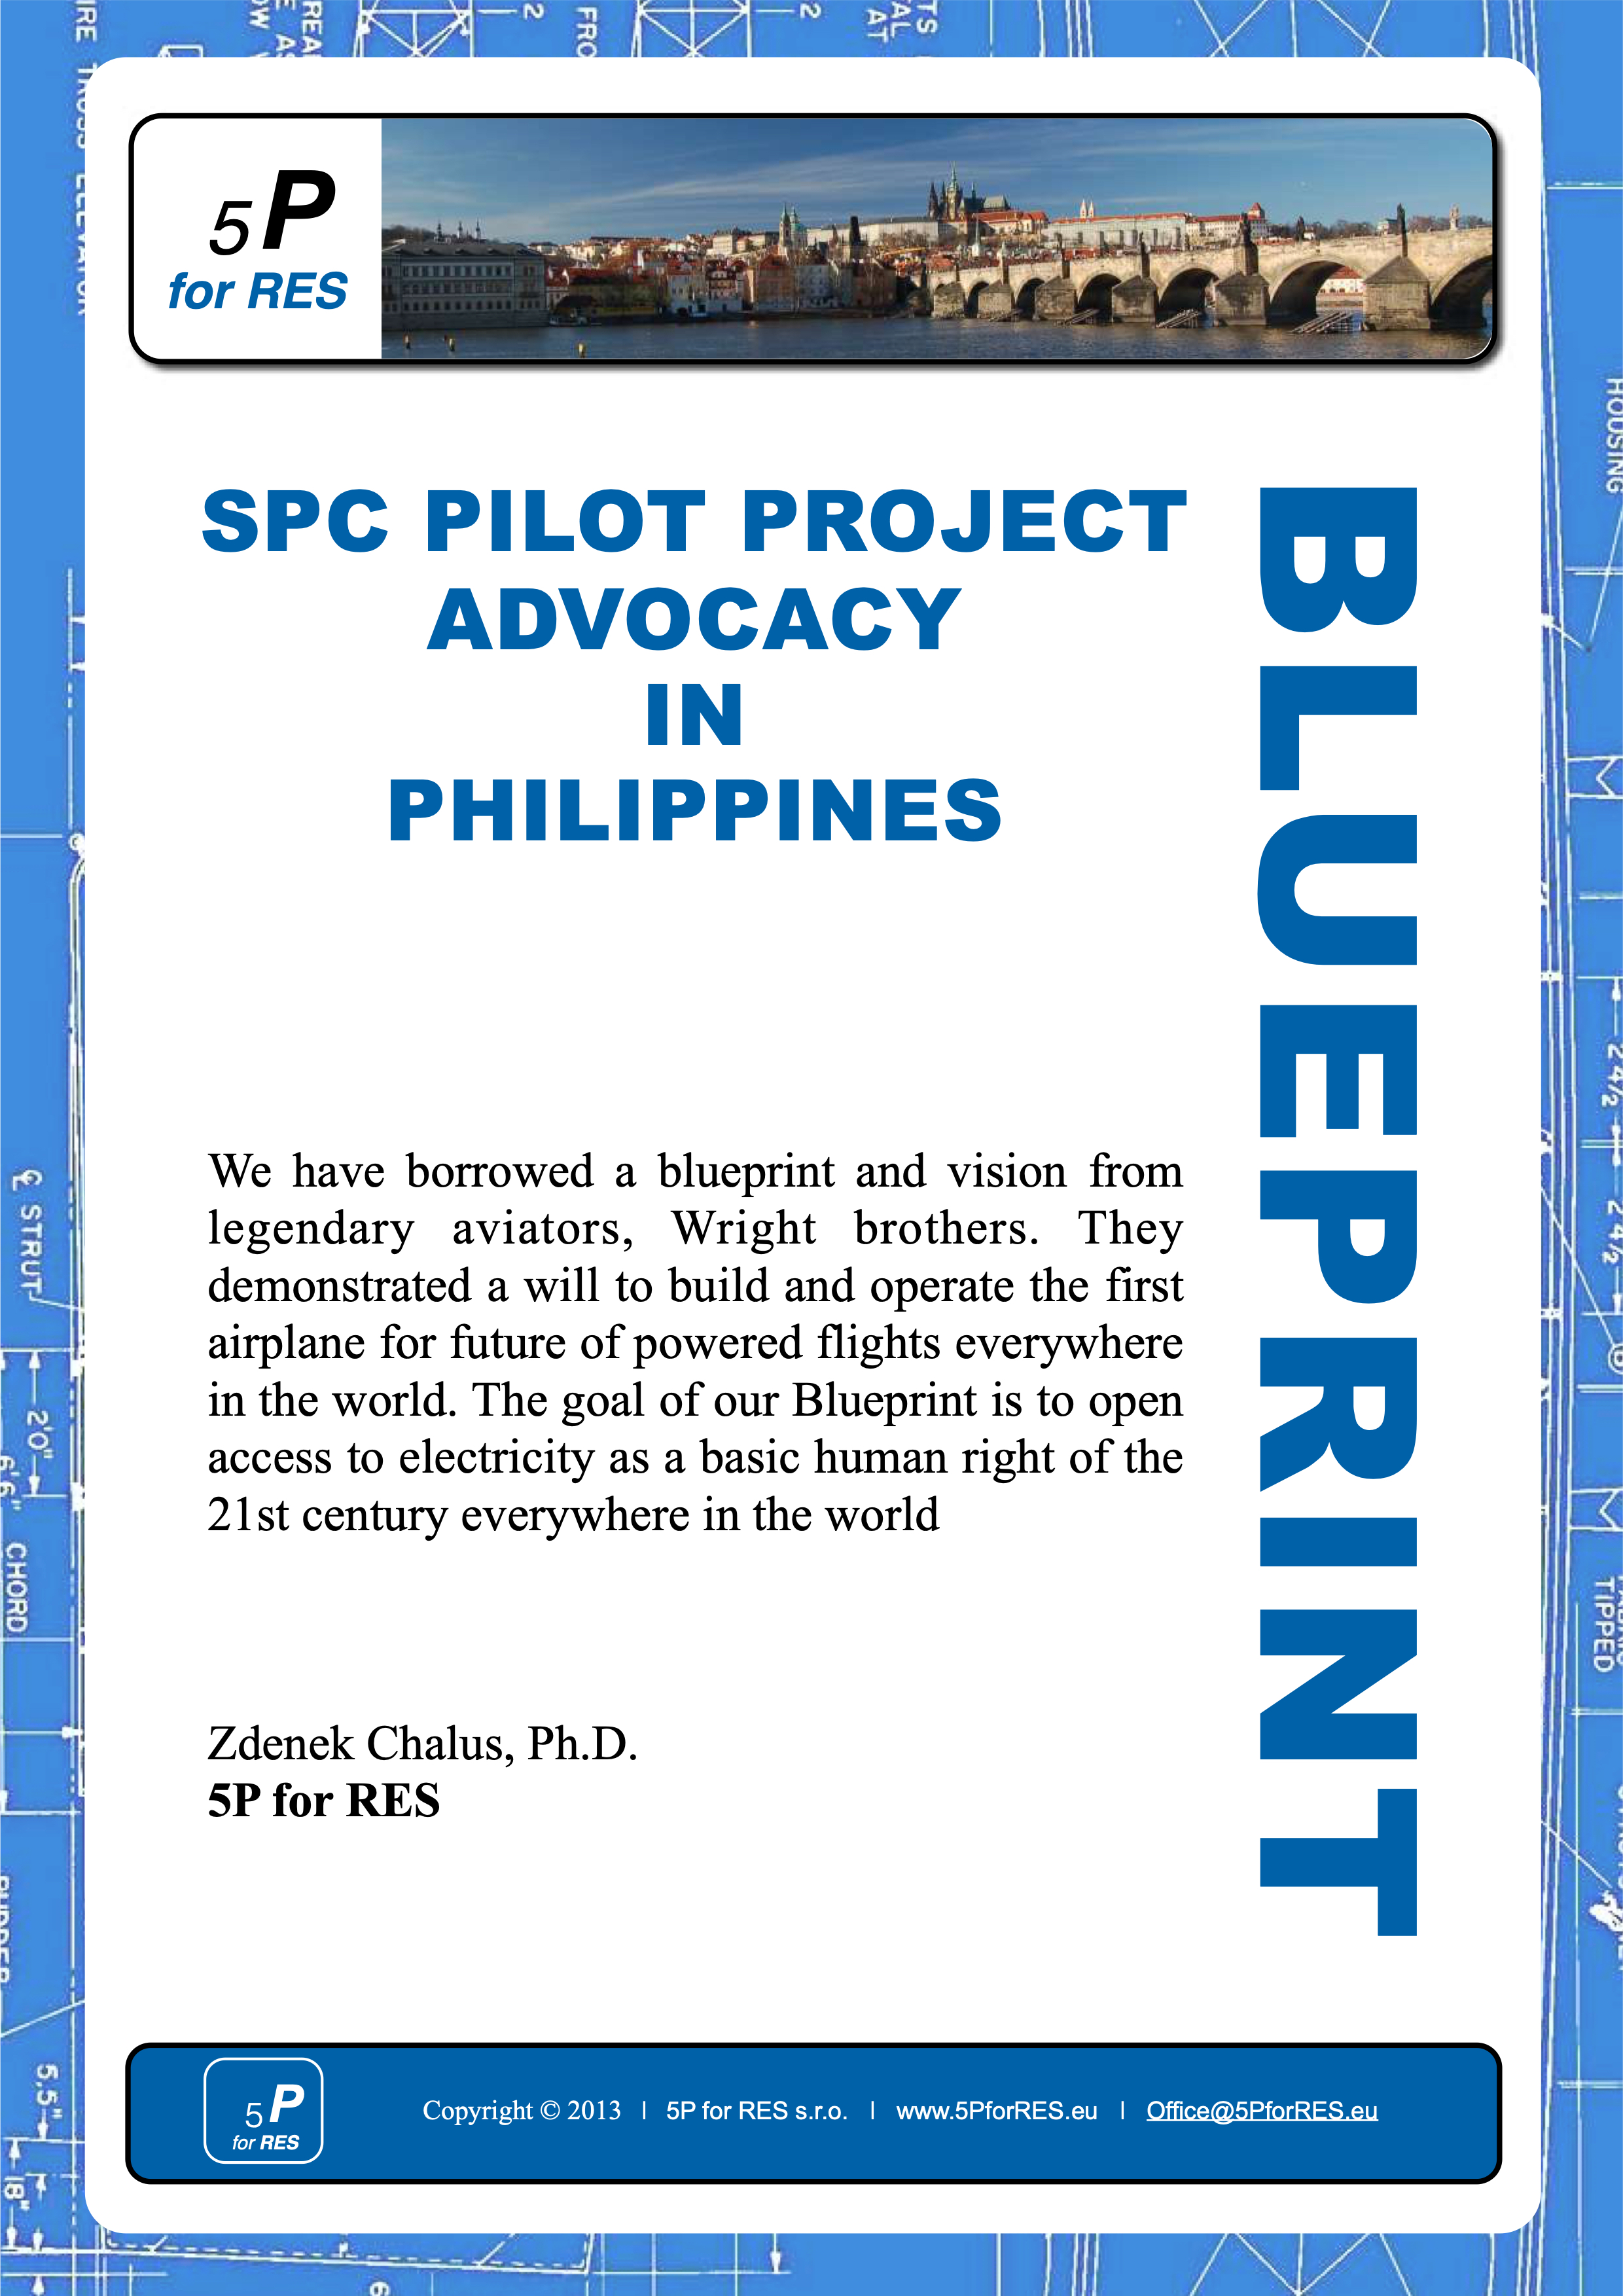 SPC pilot project in the Philippines